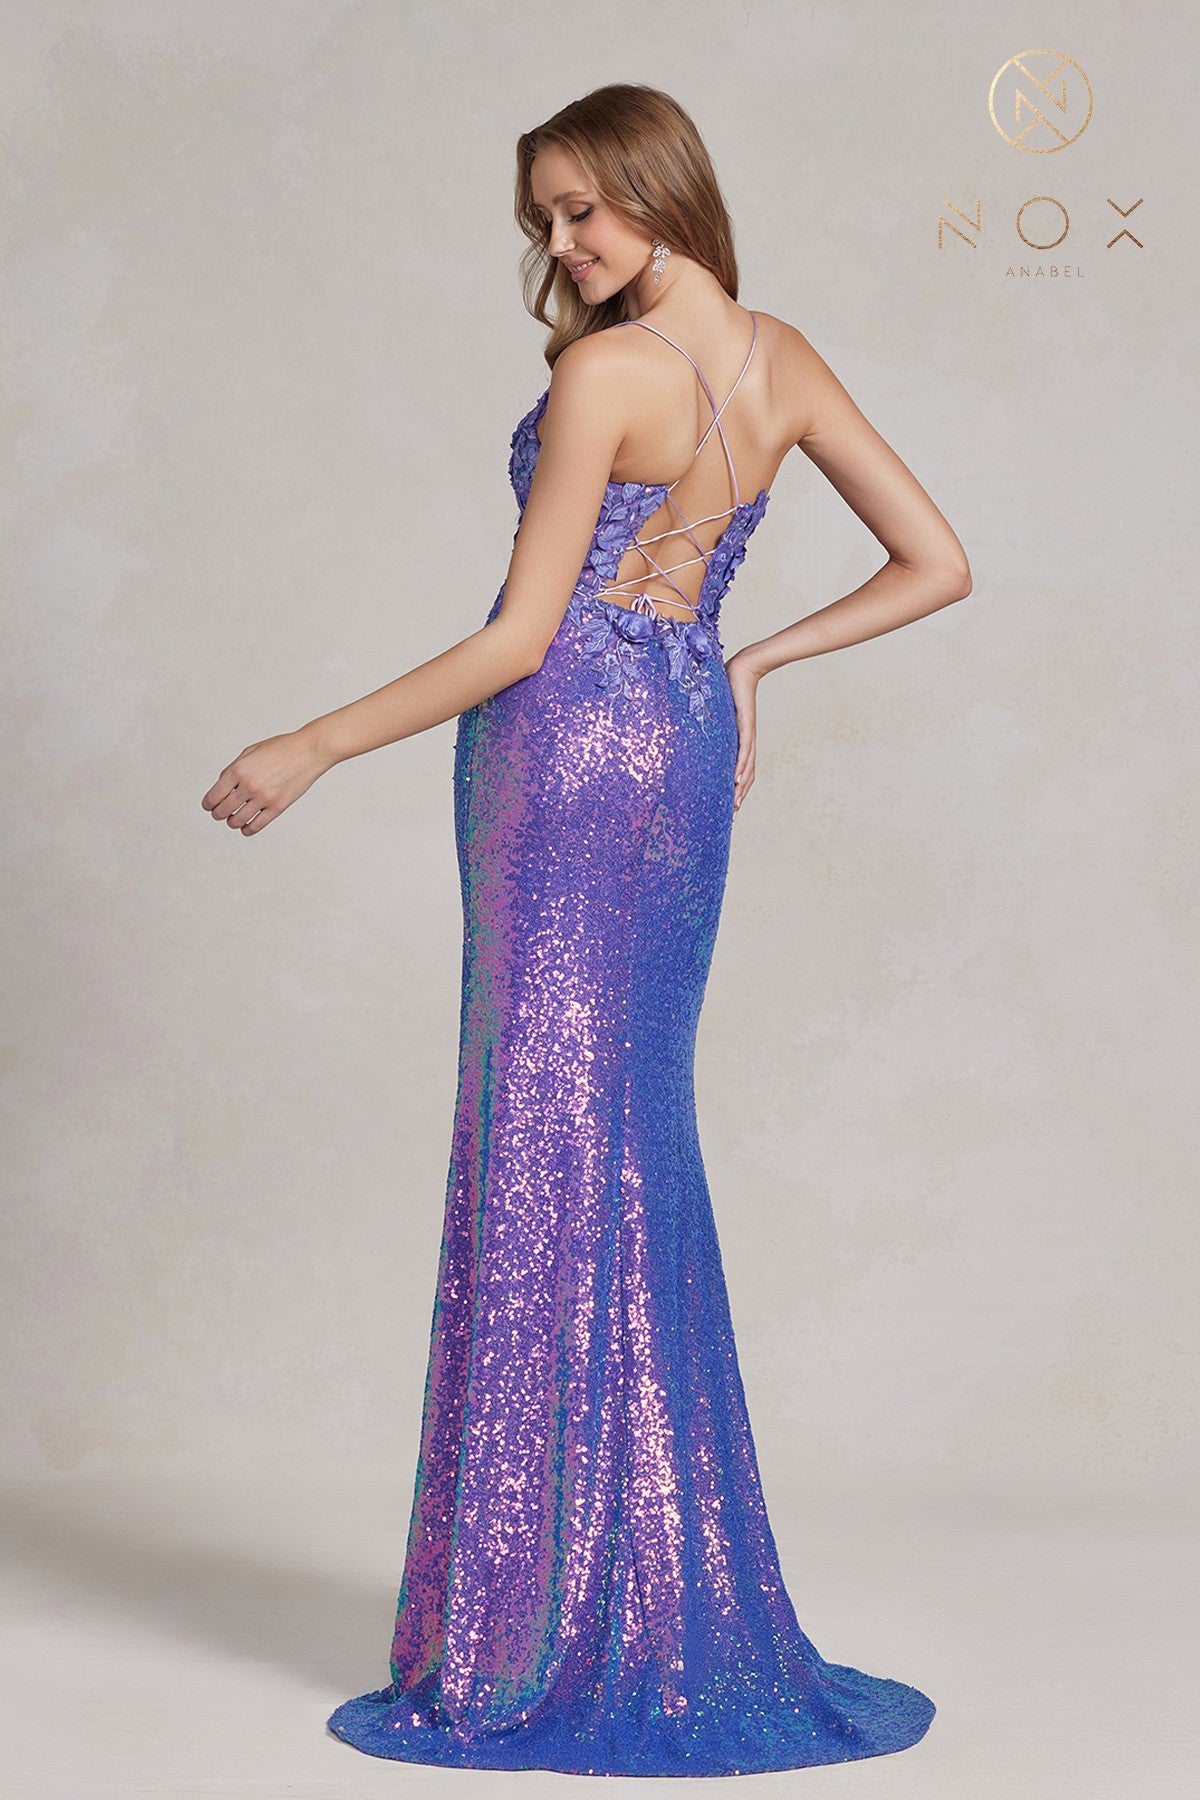 Applique Fitted Sequin Dress By Nox Anabel -R1207